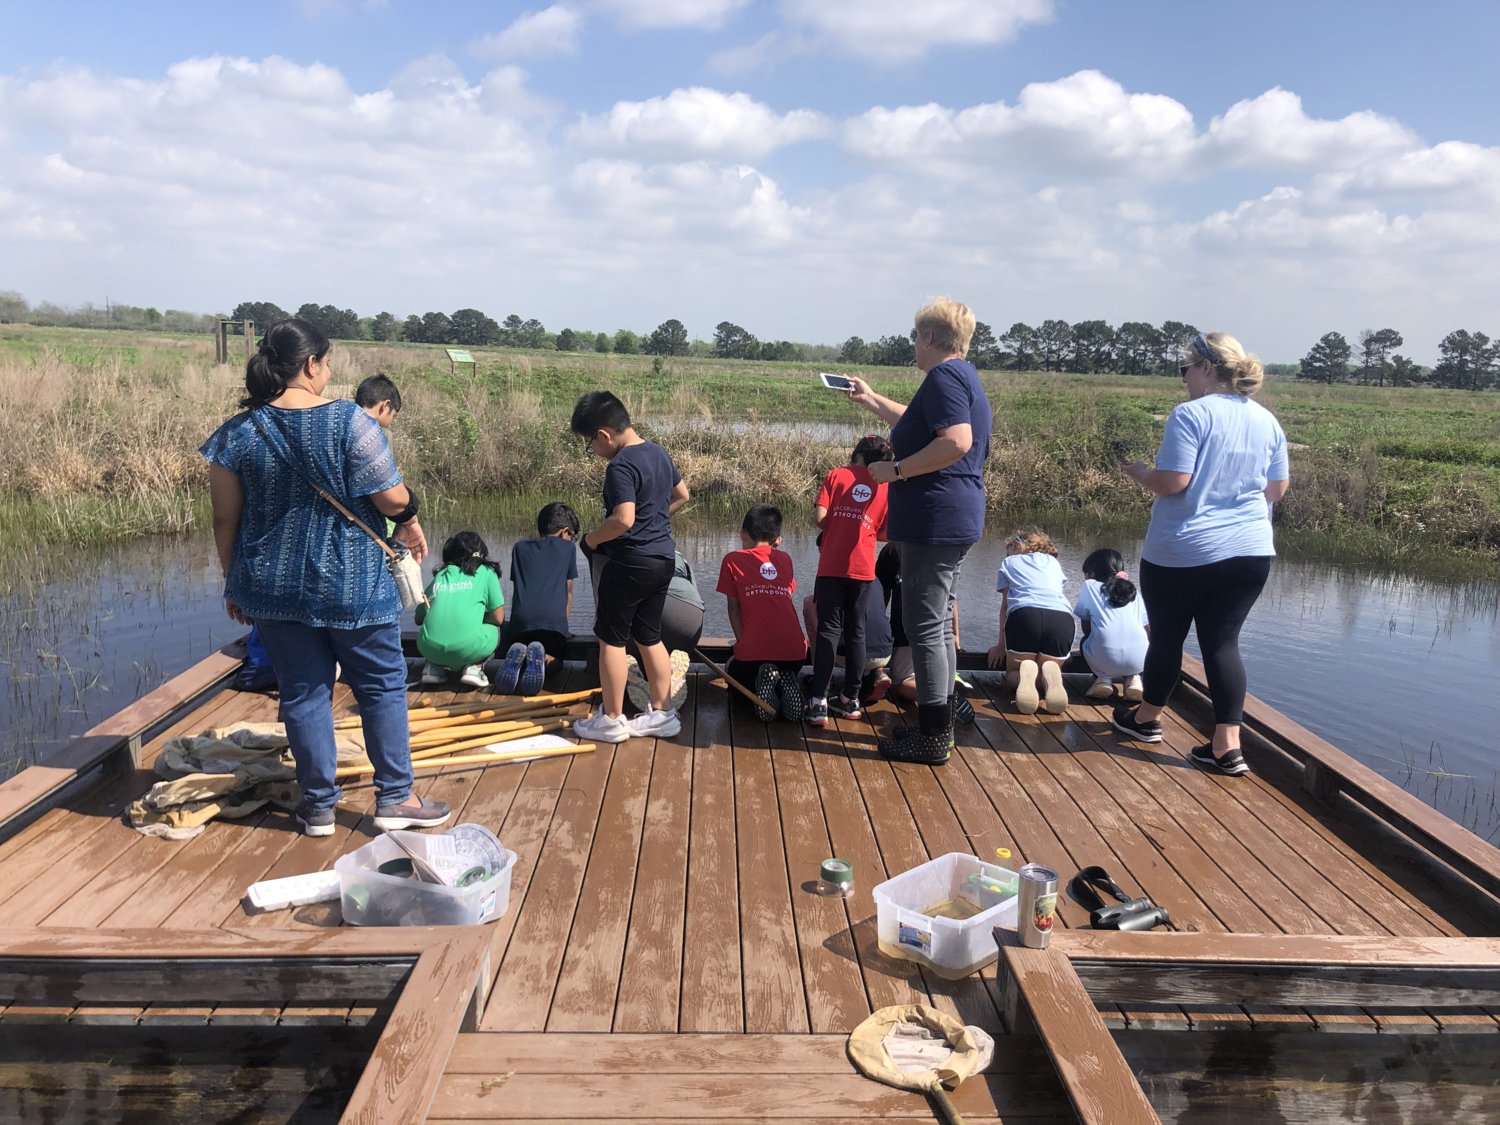 Students from Amy Campbell Elementary took a Feb. 9 field trip to the Coastal Prairie Conservancy, and were joined by their school’s namesake, Amy Campbell, second adult from right. Students are pictured doing their pond activity. This year’s TEKS require students to make seed balls and learn about ecosystems, and the preserve proved a good place to do those things.